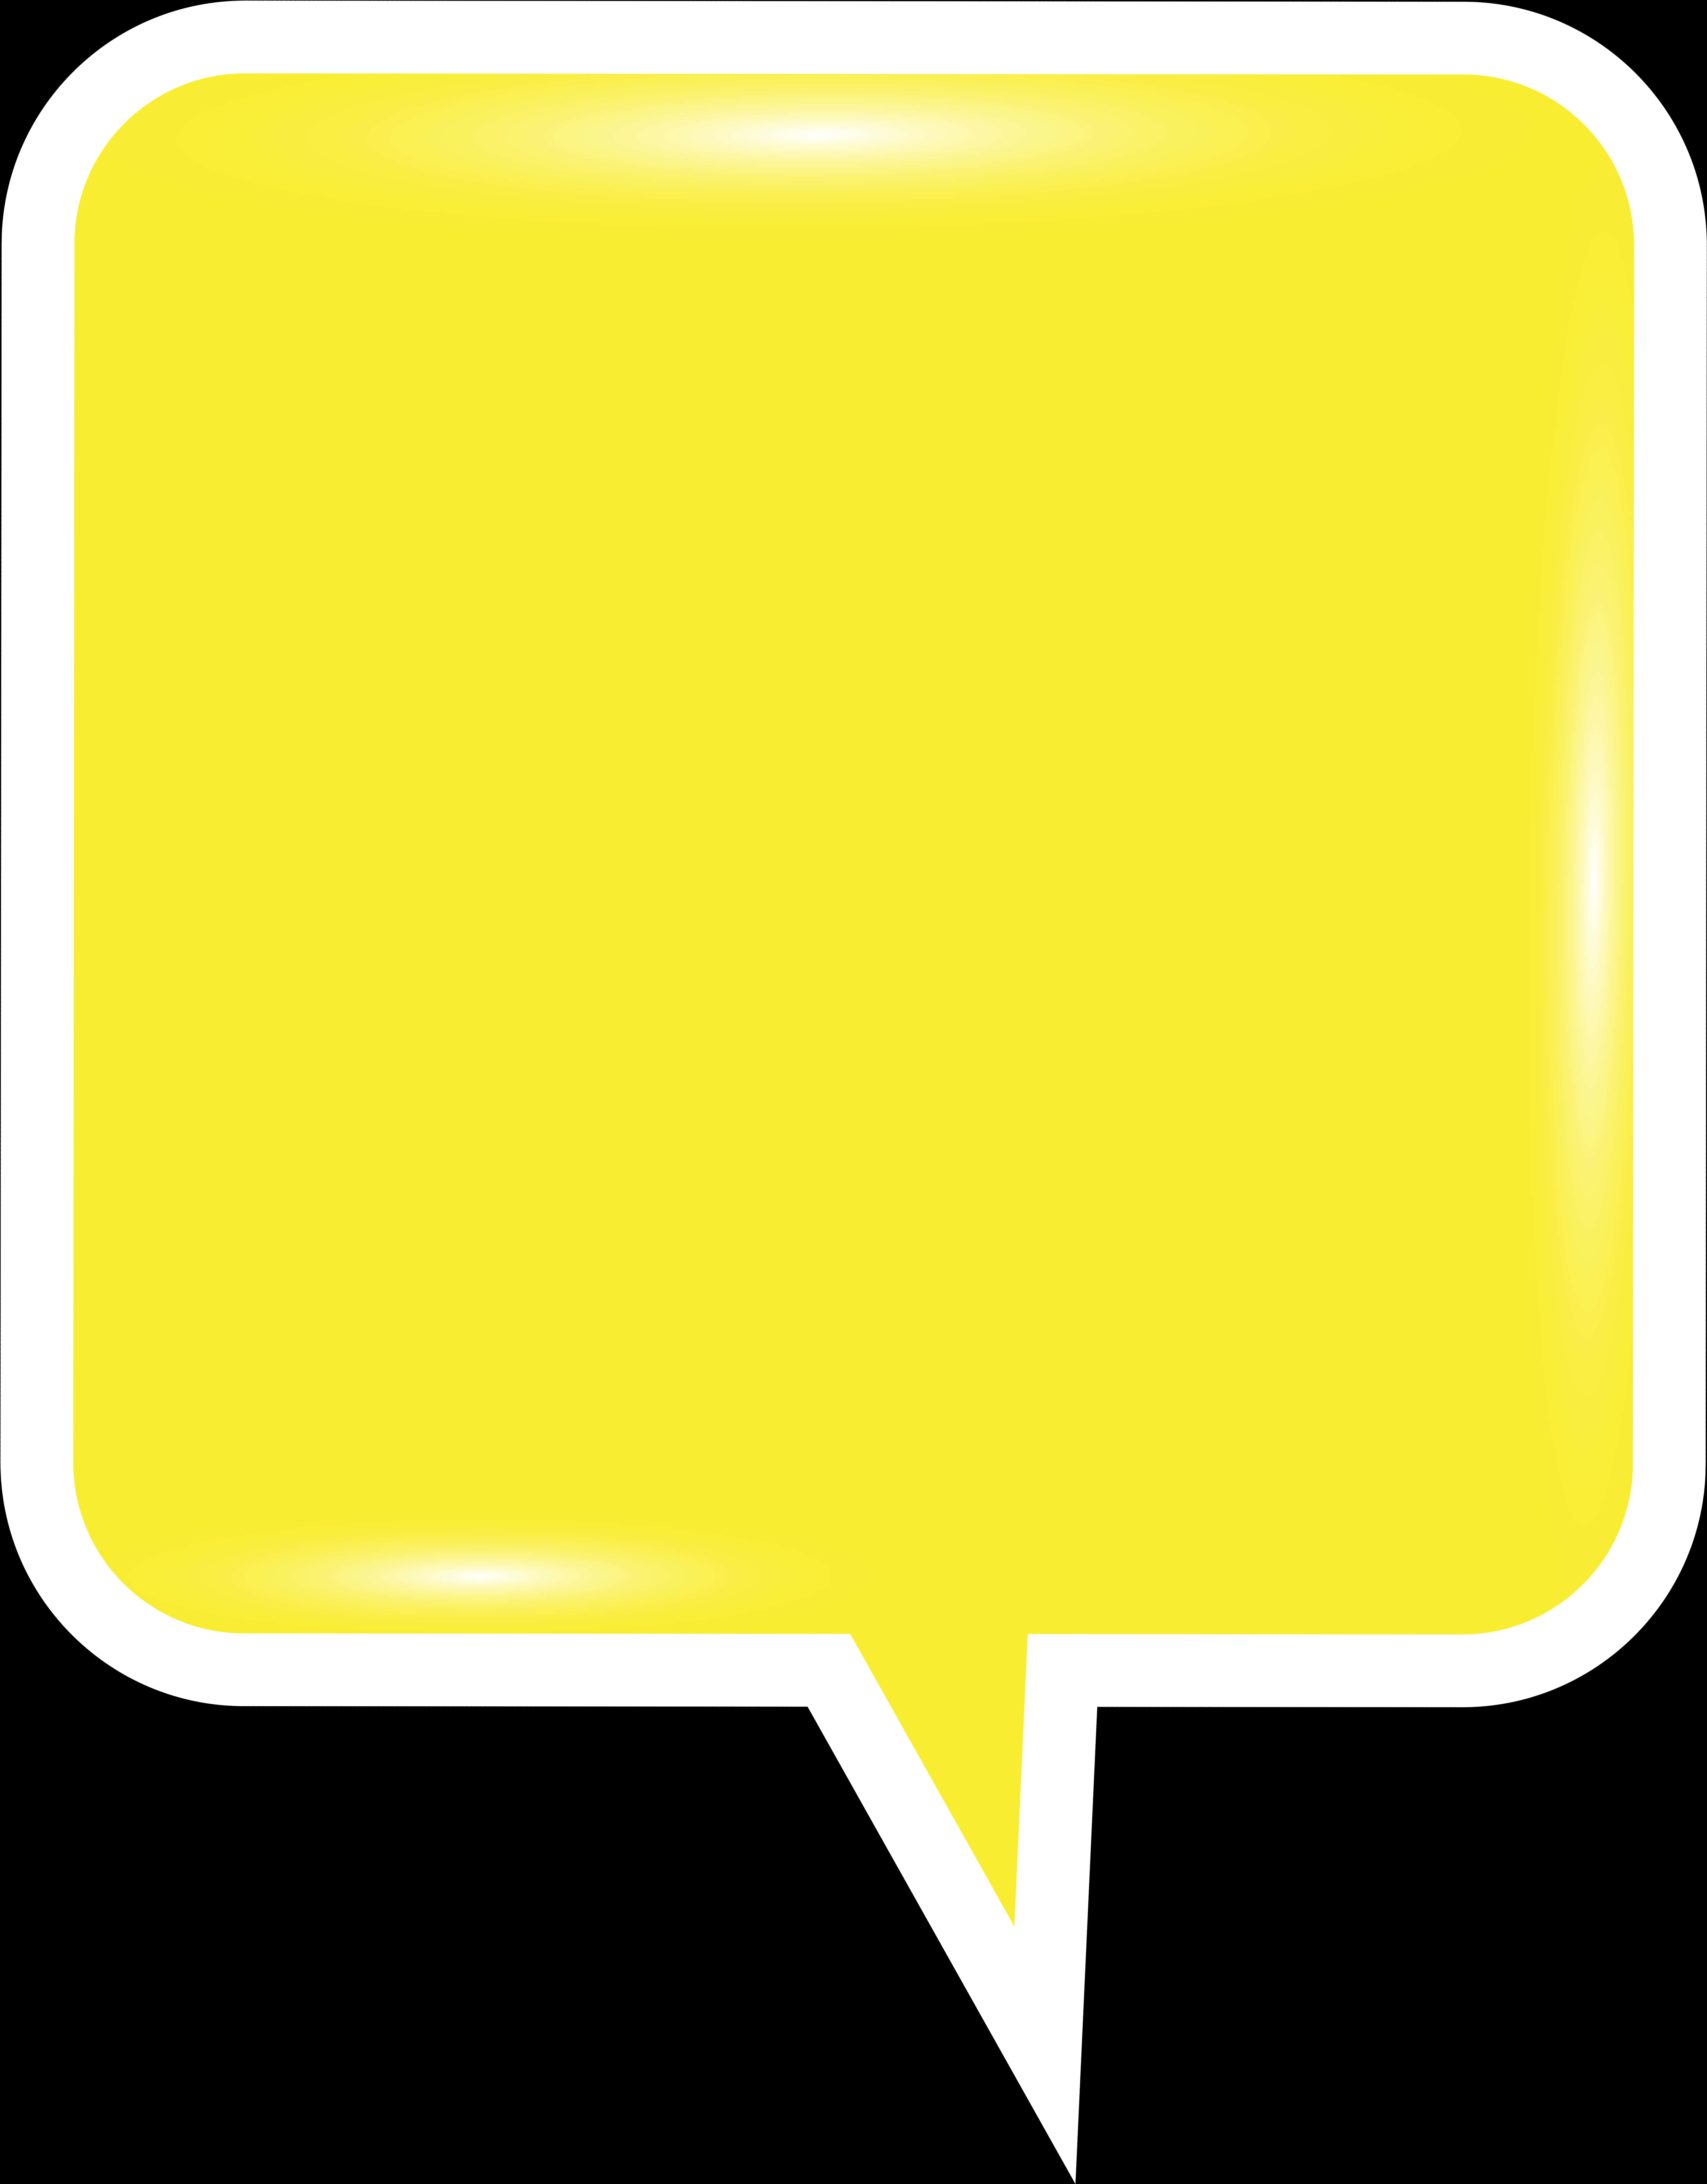 A Yellow Square With White Border